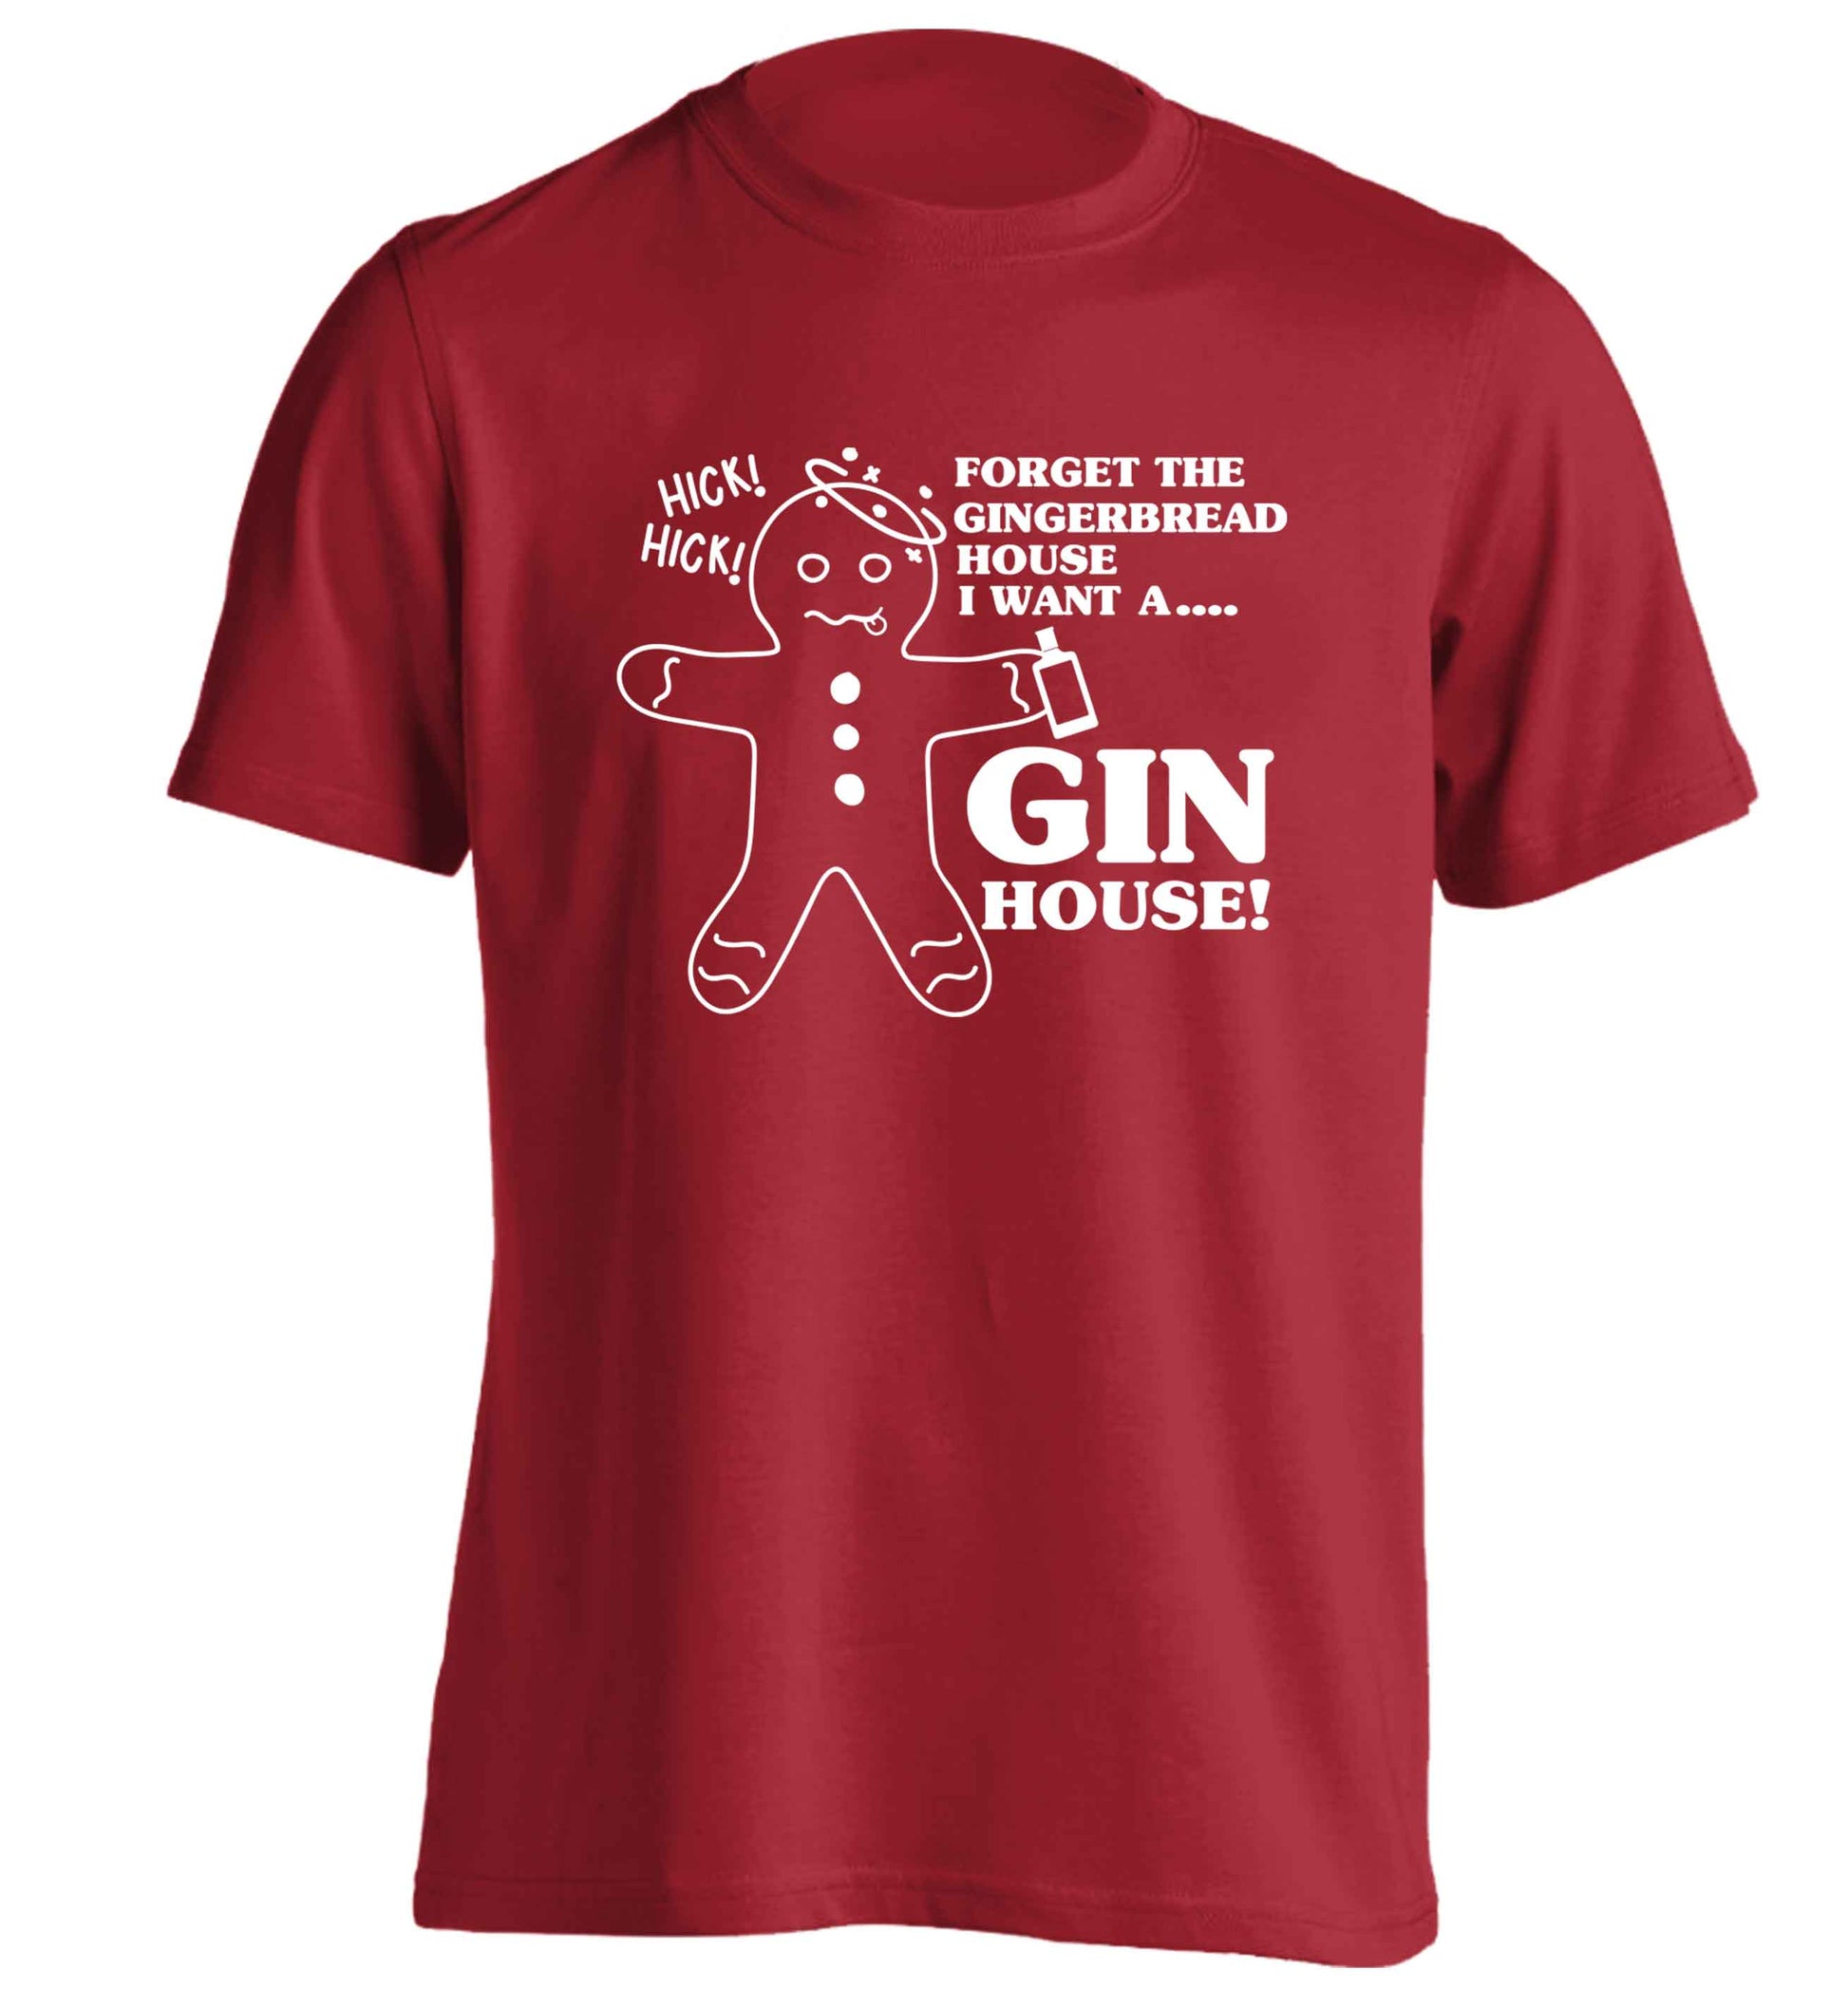 Forget the gingerbread house I want a gin house adults unisex red Tshirt 2XL